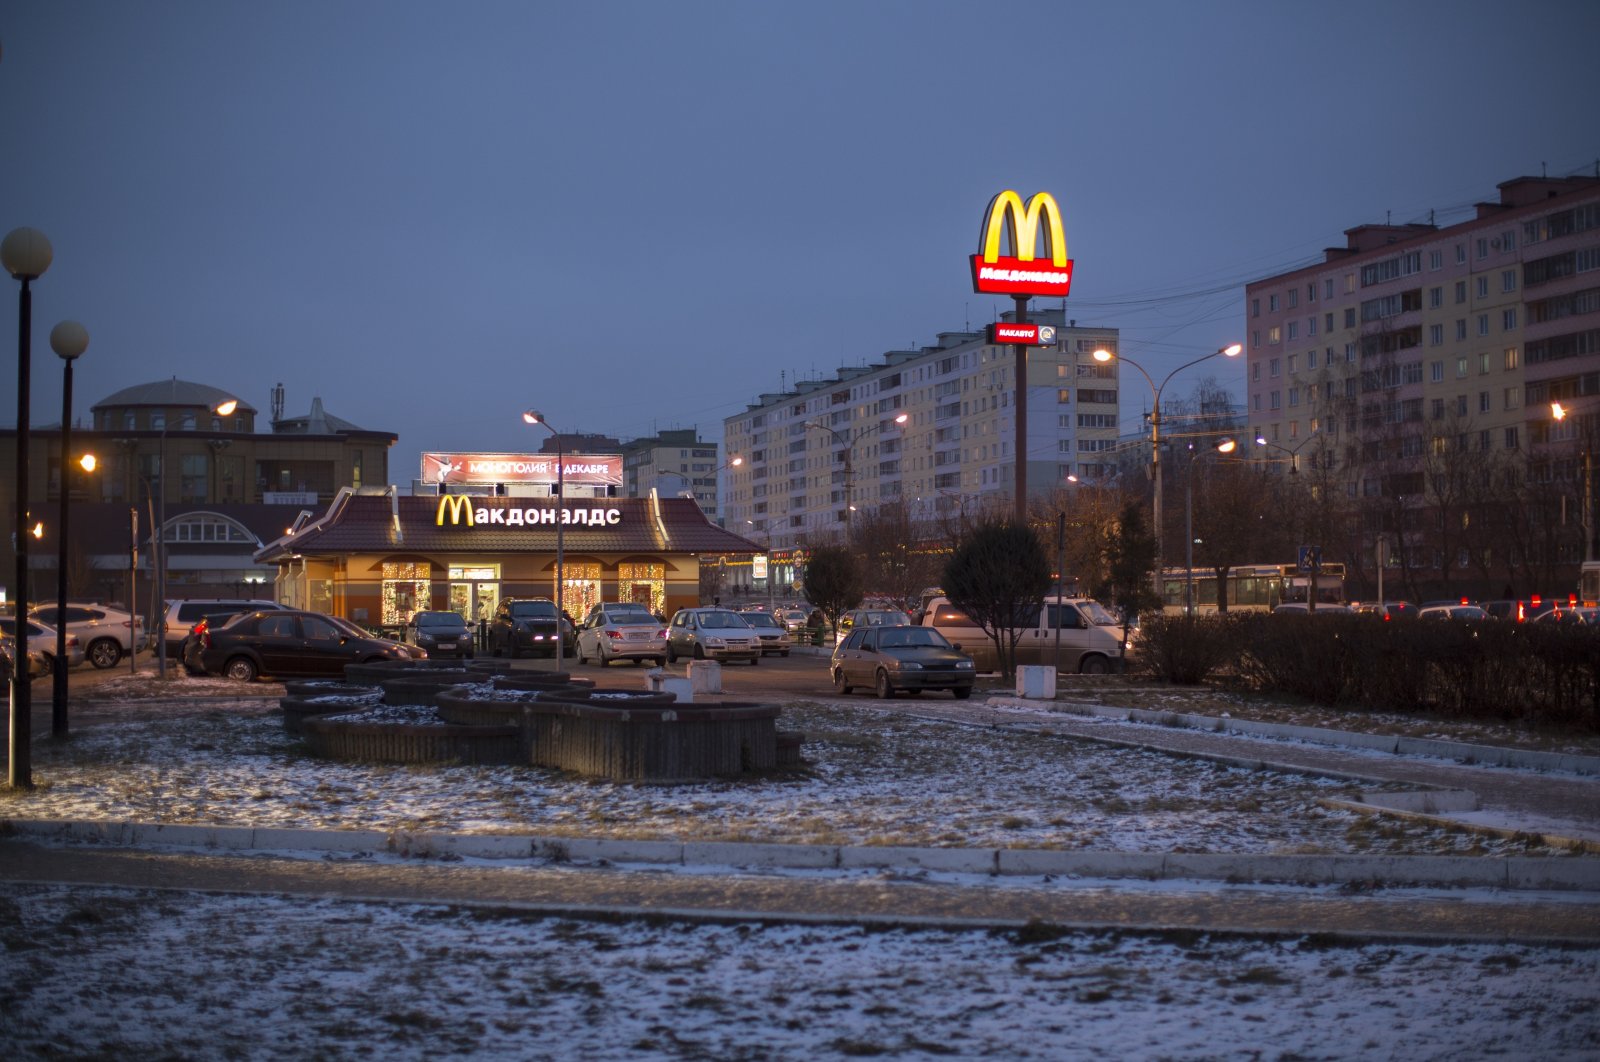 A McDonald&#039;s restaurant is seen in the center of Dmitrov, a Russian town 75 kilometers (47 miles) north of Moscow, Russia, Dec. 6, 2014. (AP Photo)